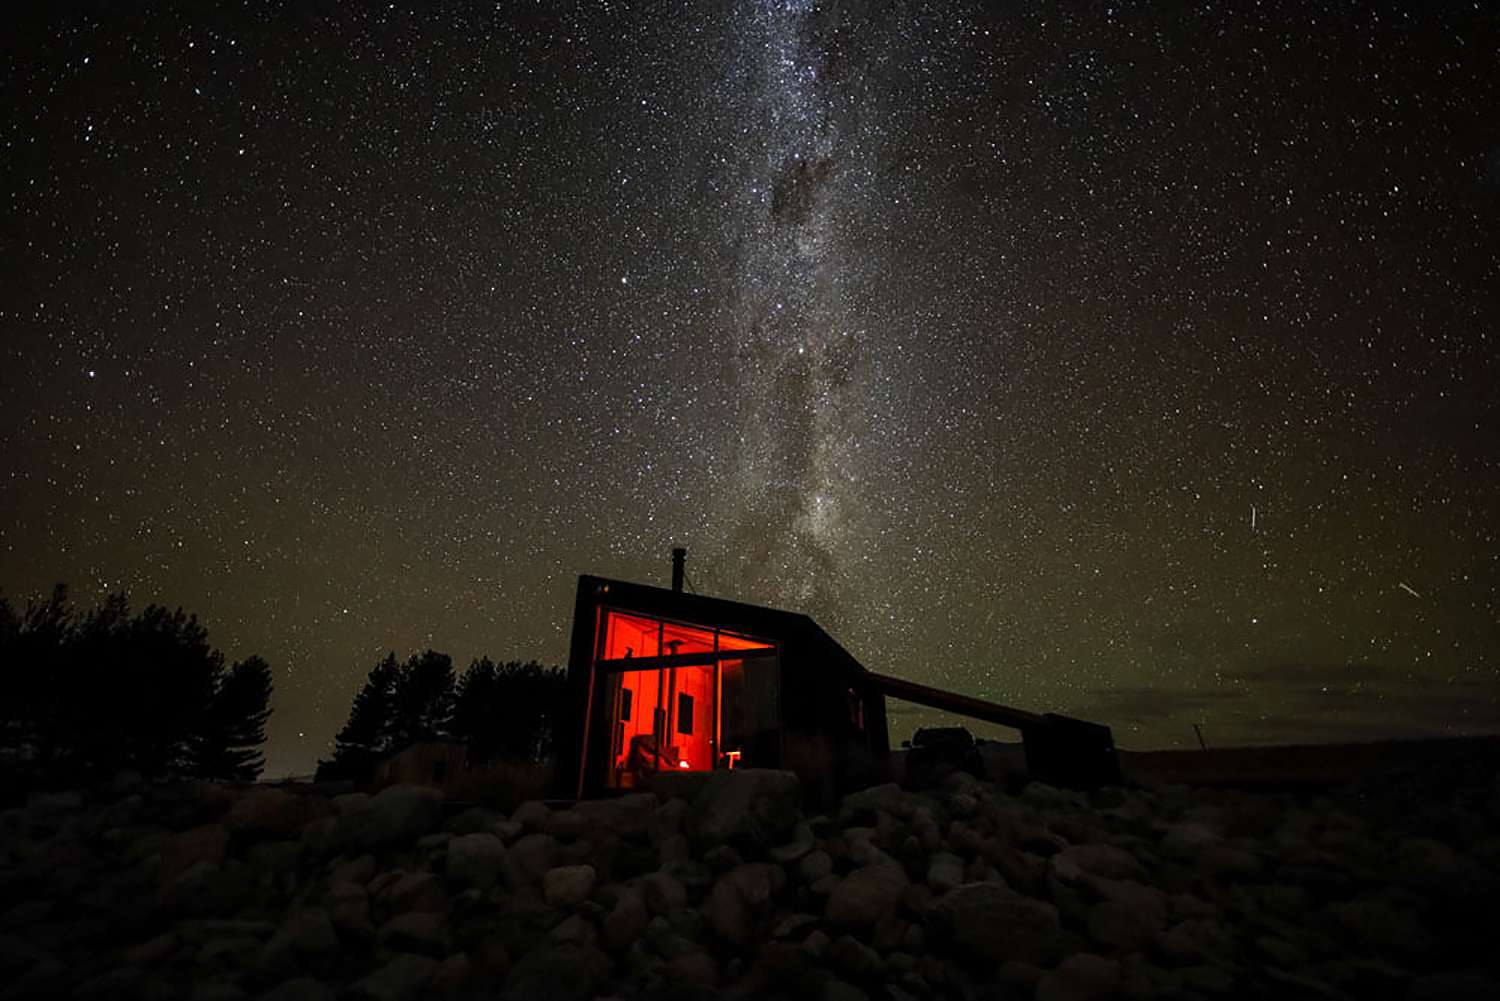  A solitary cabin illuminated with red light inside under a magnificent night sky filled with stars and the Milky Way, set against a backdrop of a dark landscape with silhouetted trees.